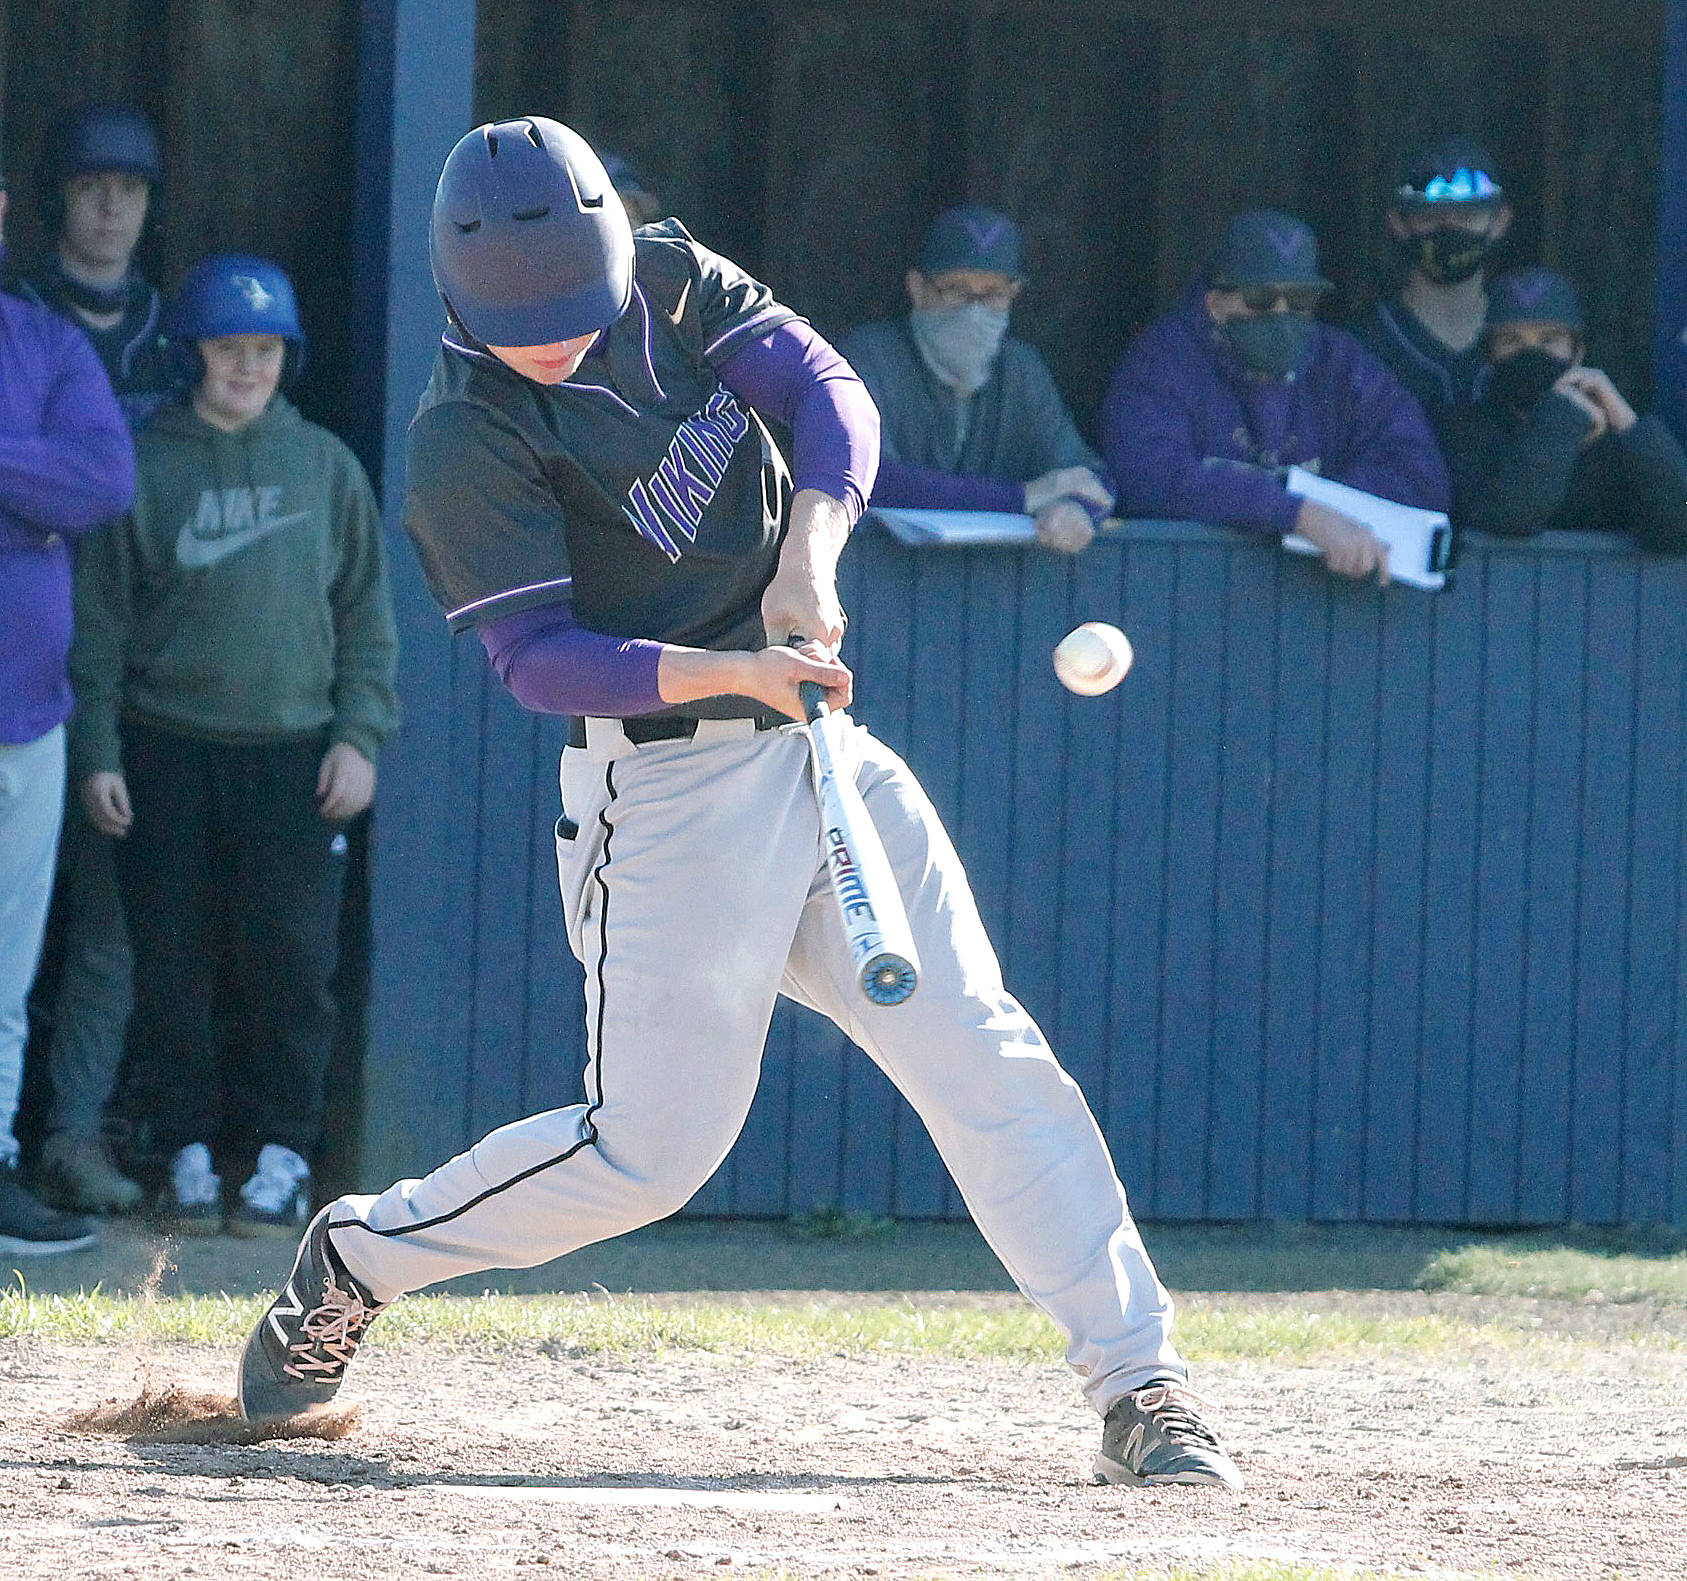 North Kitsap’s Colton Bower was an all-league selection as a catcher. (KNG file photo)